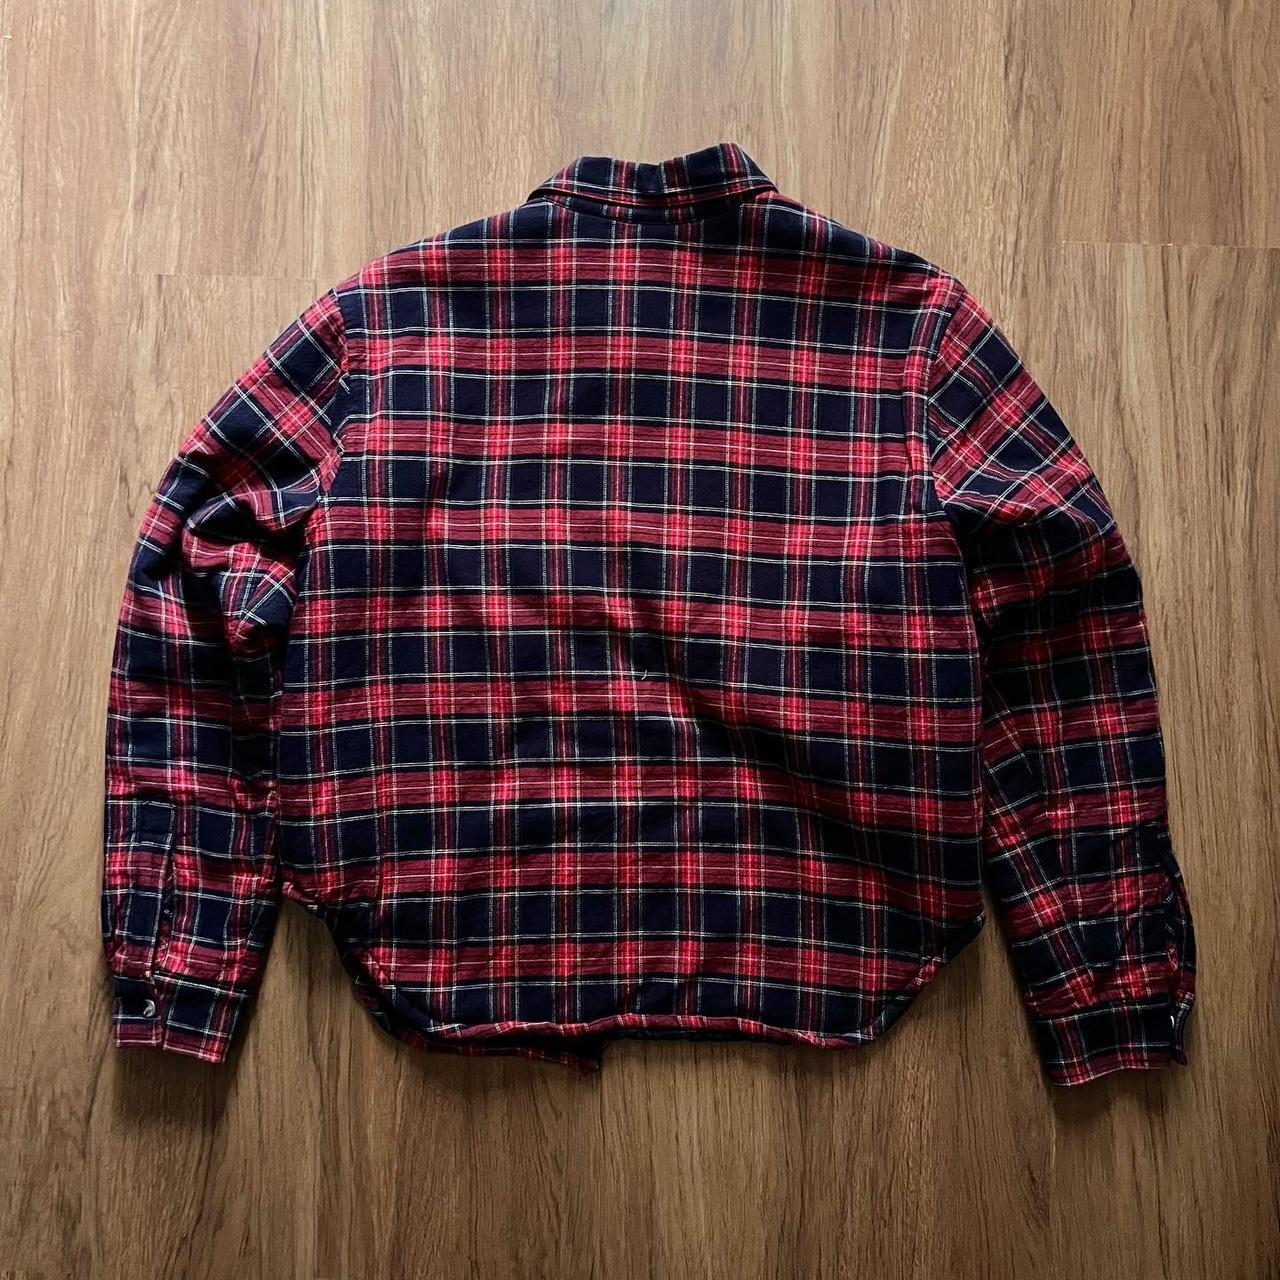 Chicoutimi Red Plaid Quilted Flannel Shirt